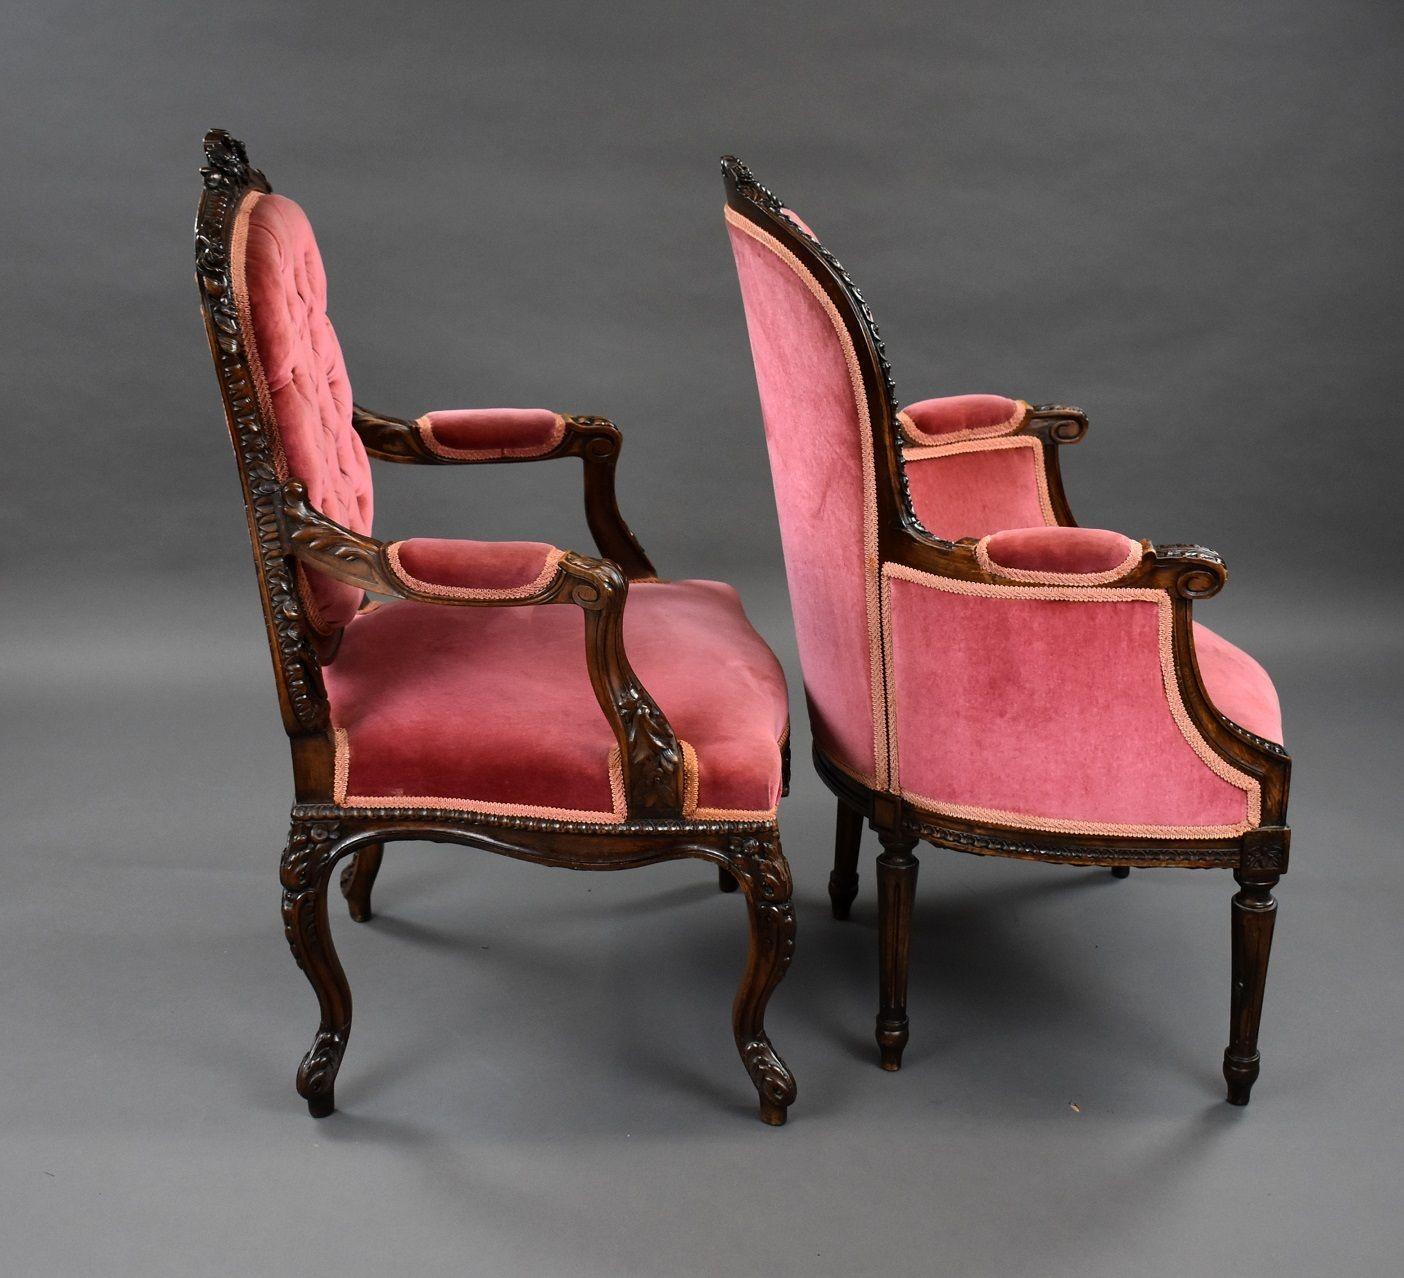 French style Mahogany Boudoir armchairs in good condition. Both have nice ornate carvings and upholstered in the same pink fabric with buttoned backs. One chair has cabriole legs with open arms and the other turned legs. Both are in good condition;